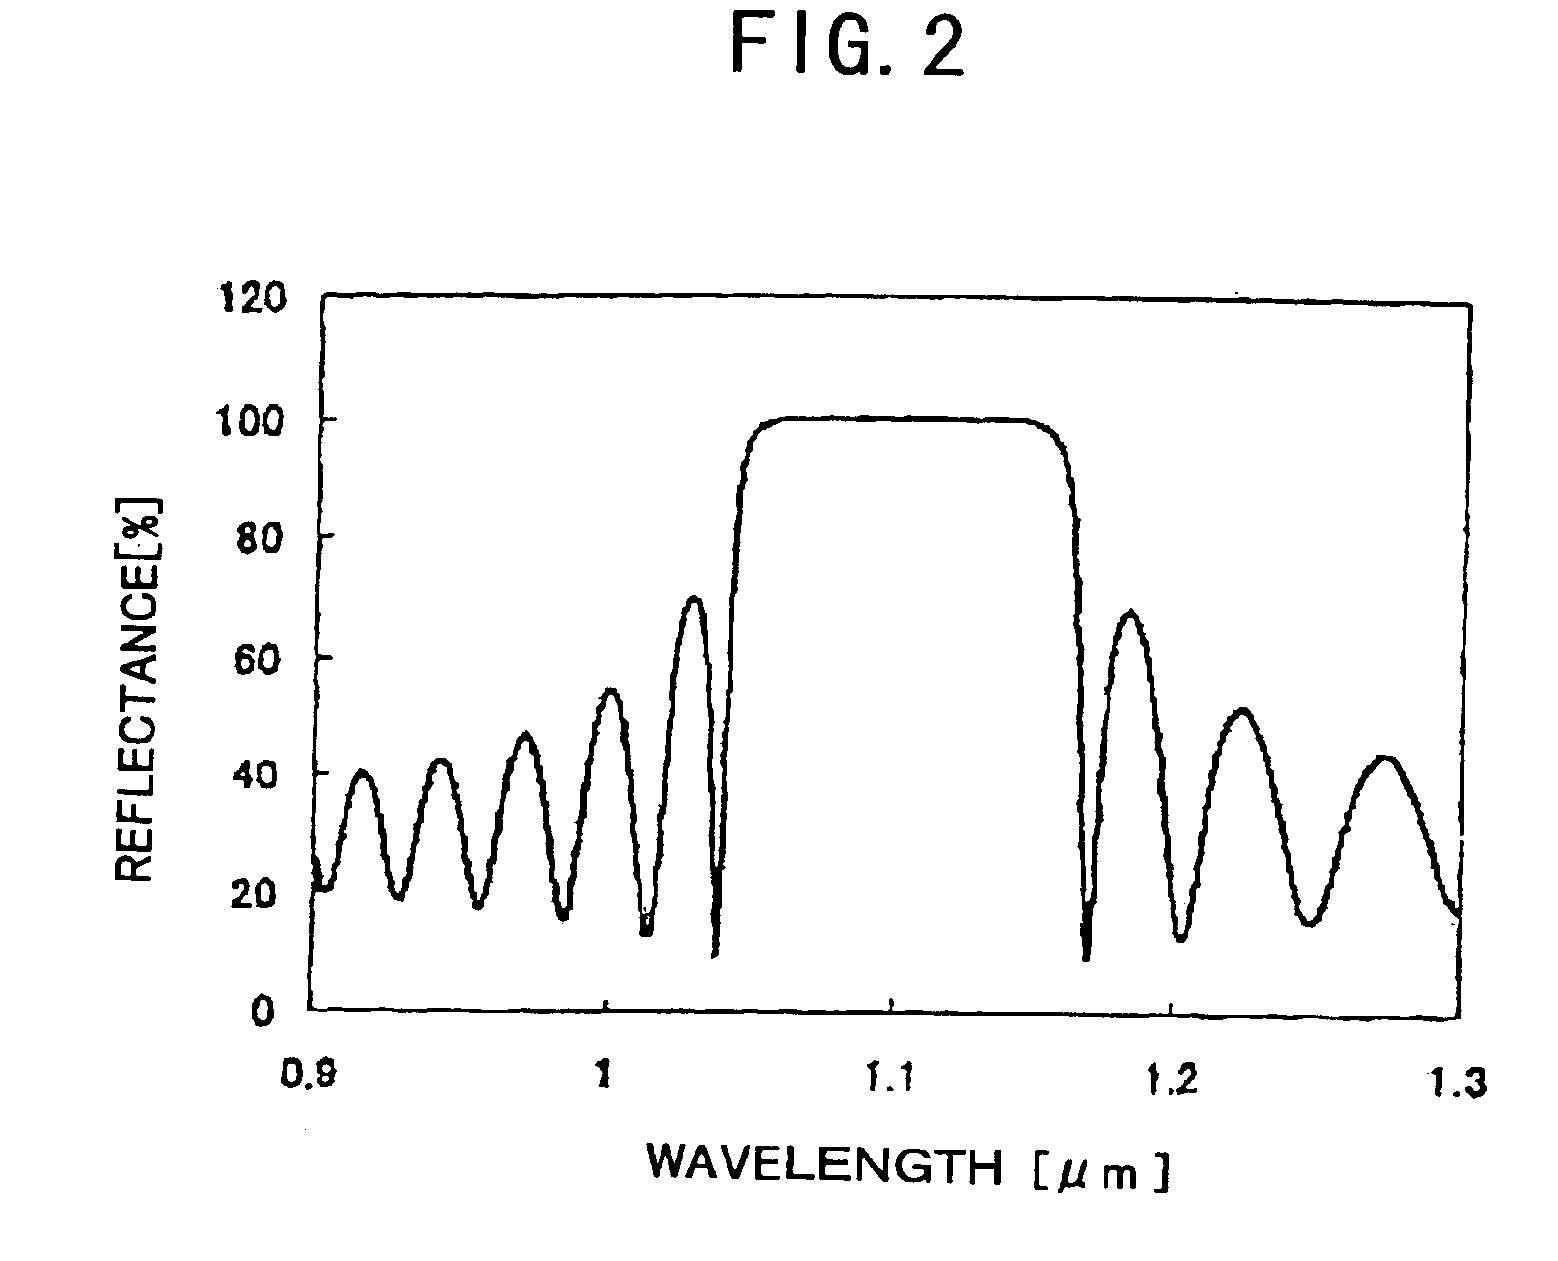 Surface-emission laser diode operable in the wavelength band of 1.1-7mum and optical telecommunication system using such a laser diode